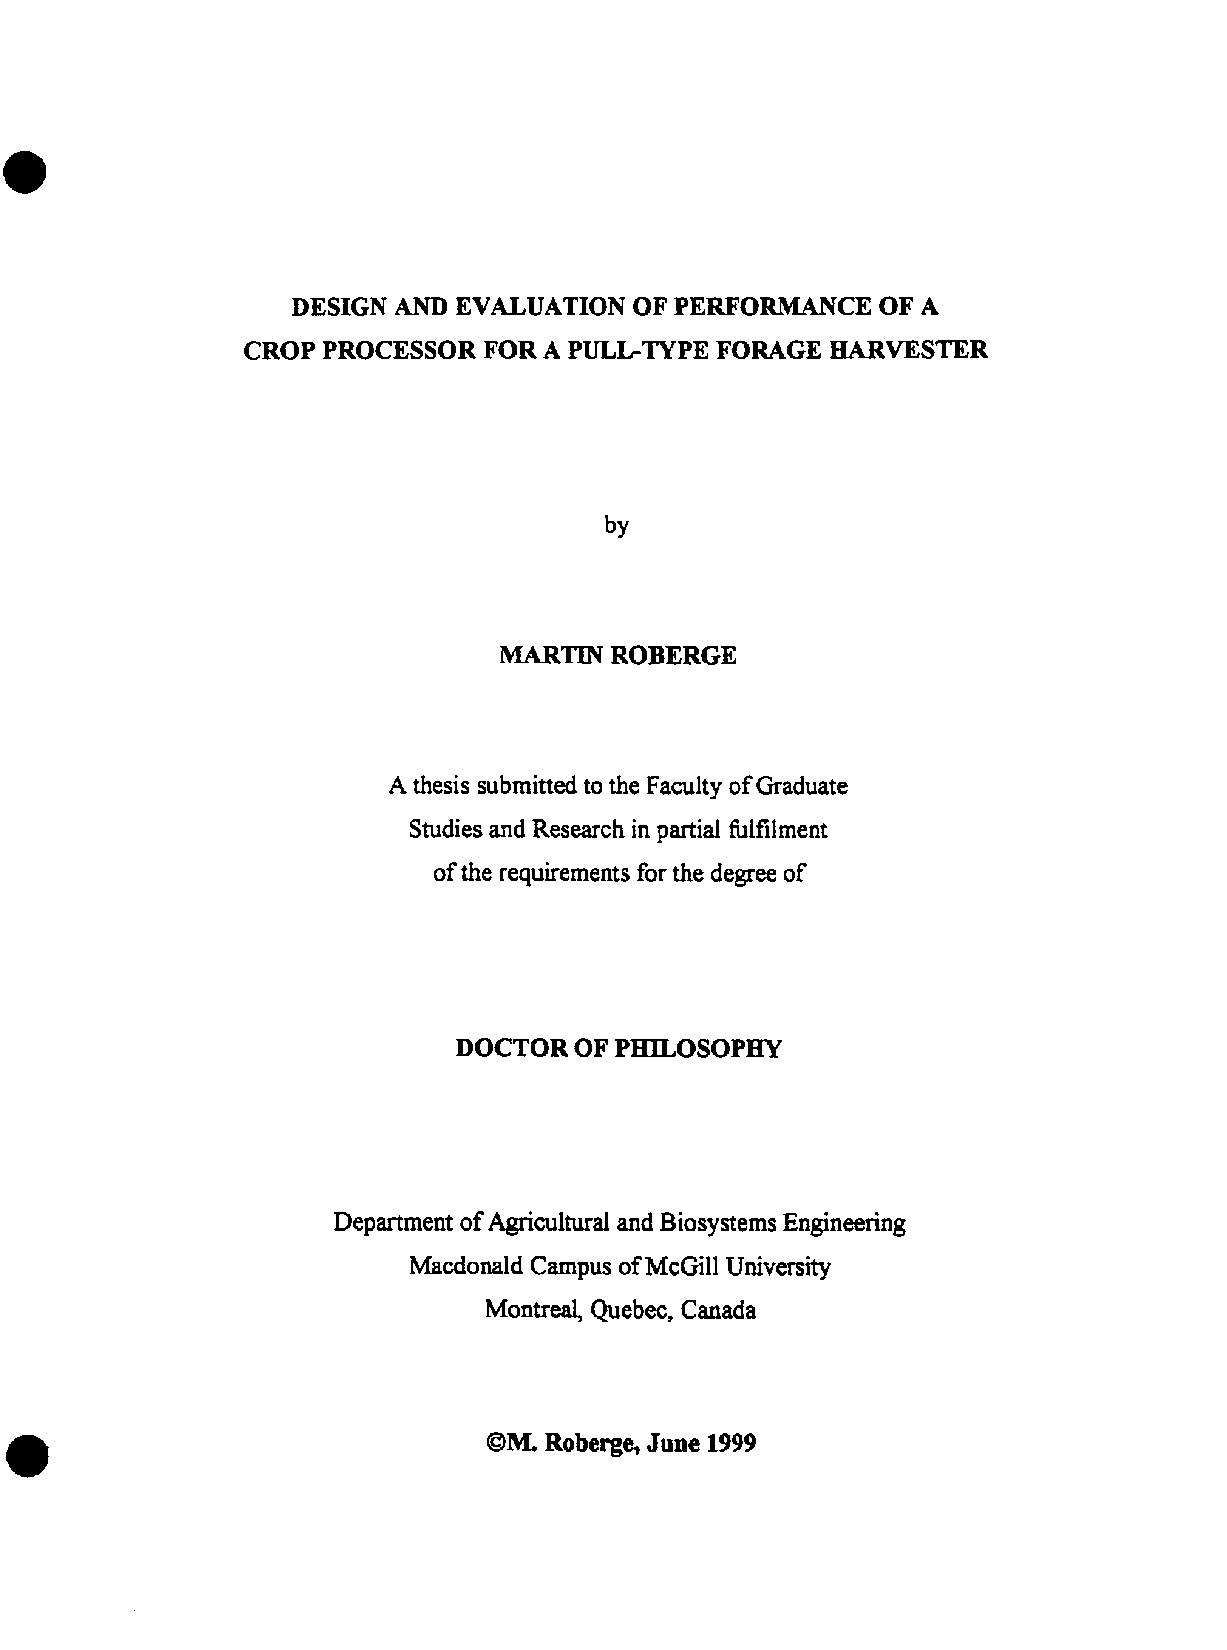 A thesis submitted to the Faculty of Graduate Department of Agricultural and Biosystems Engineering ( PDFDrive.com )